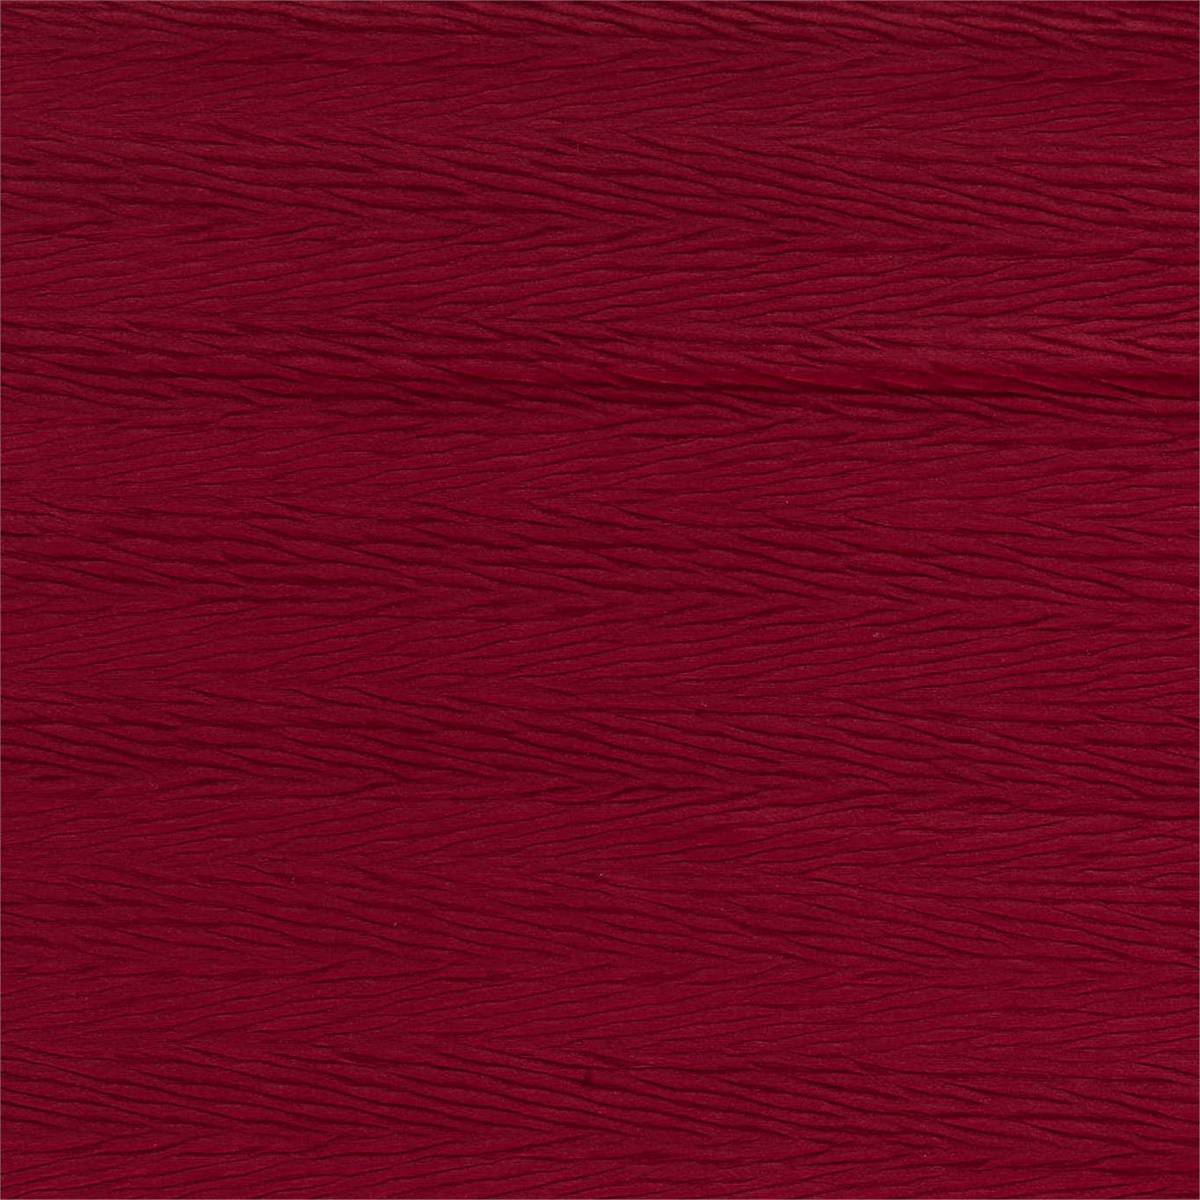 Florio Claret Fabric by Harlequin